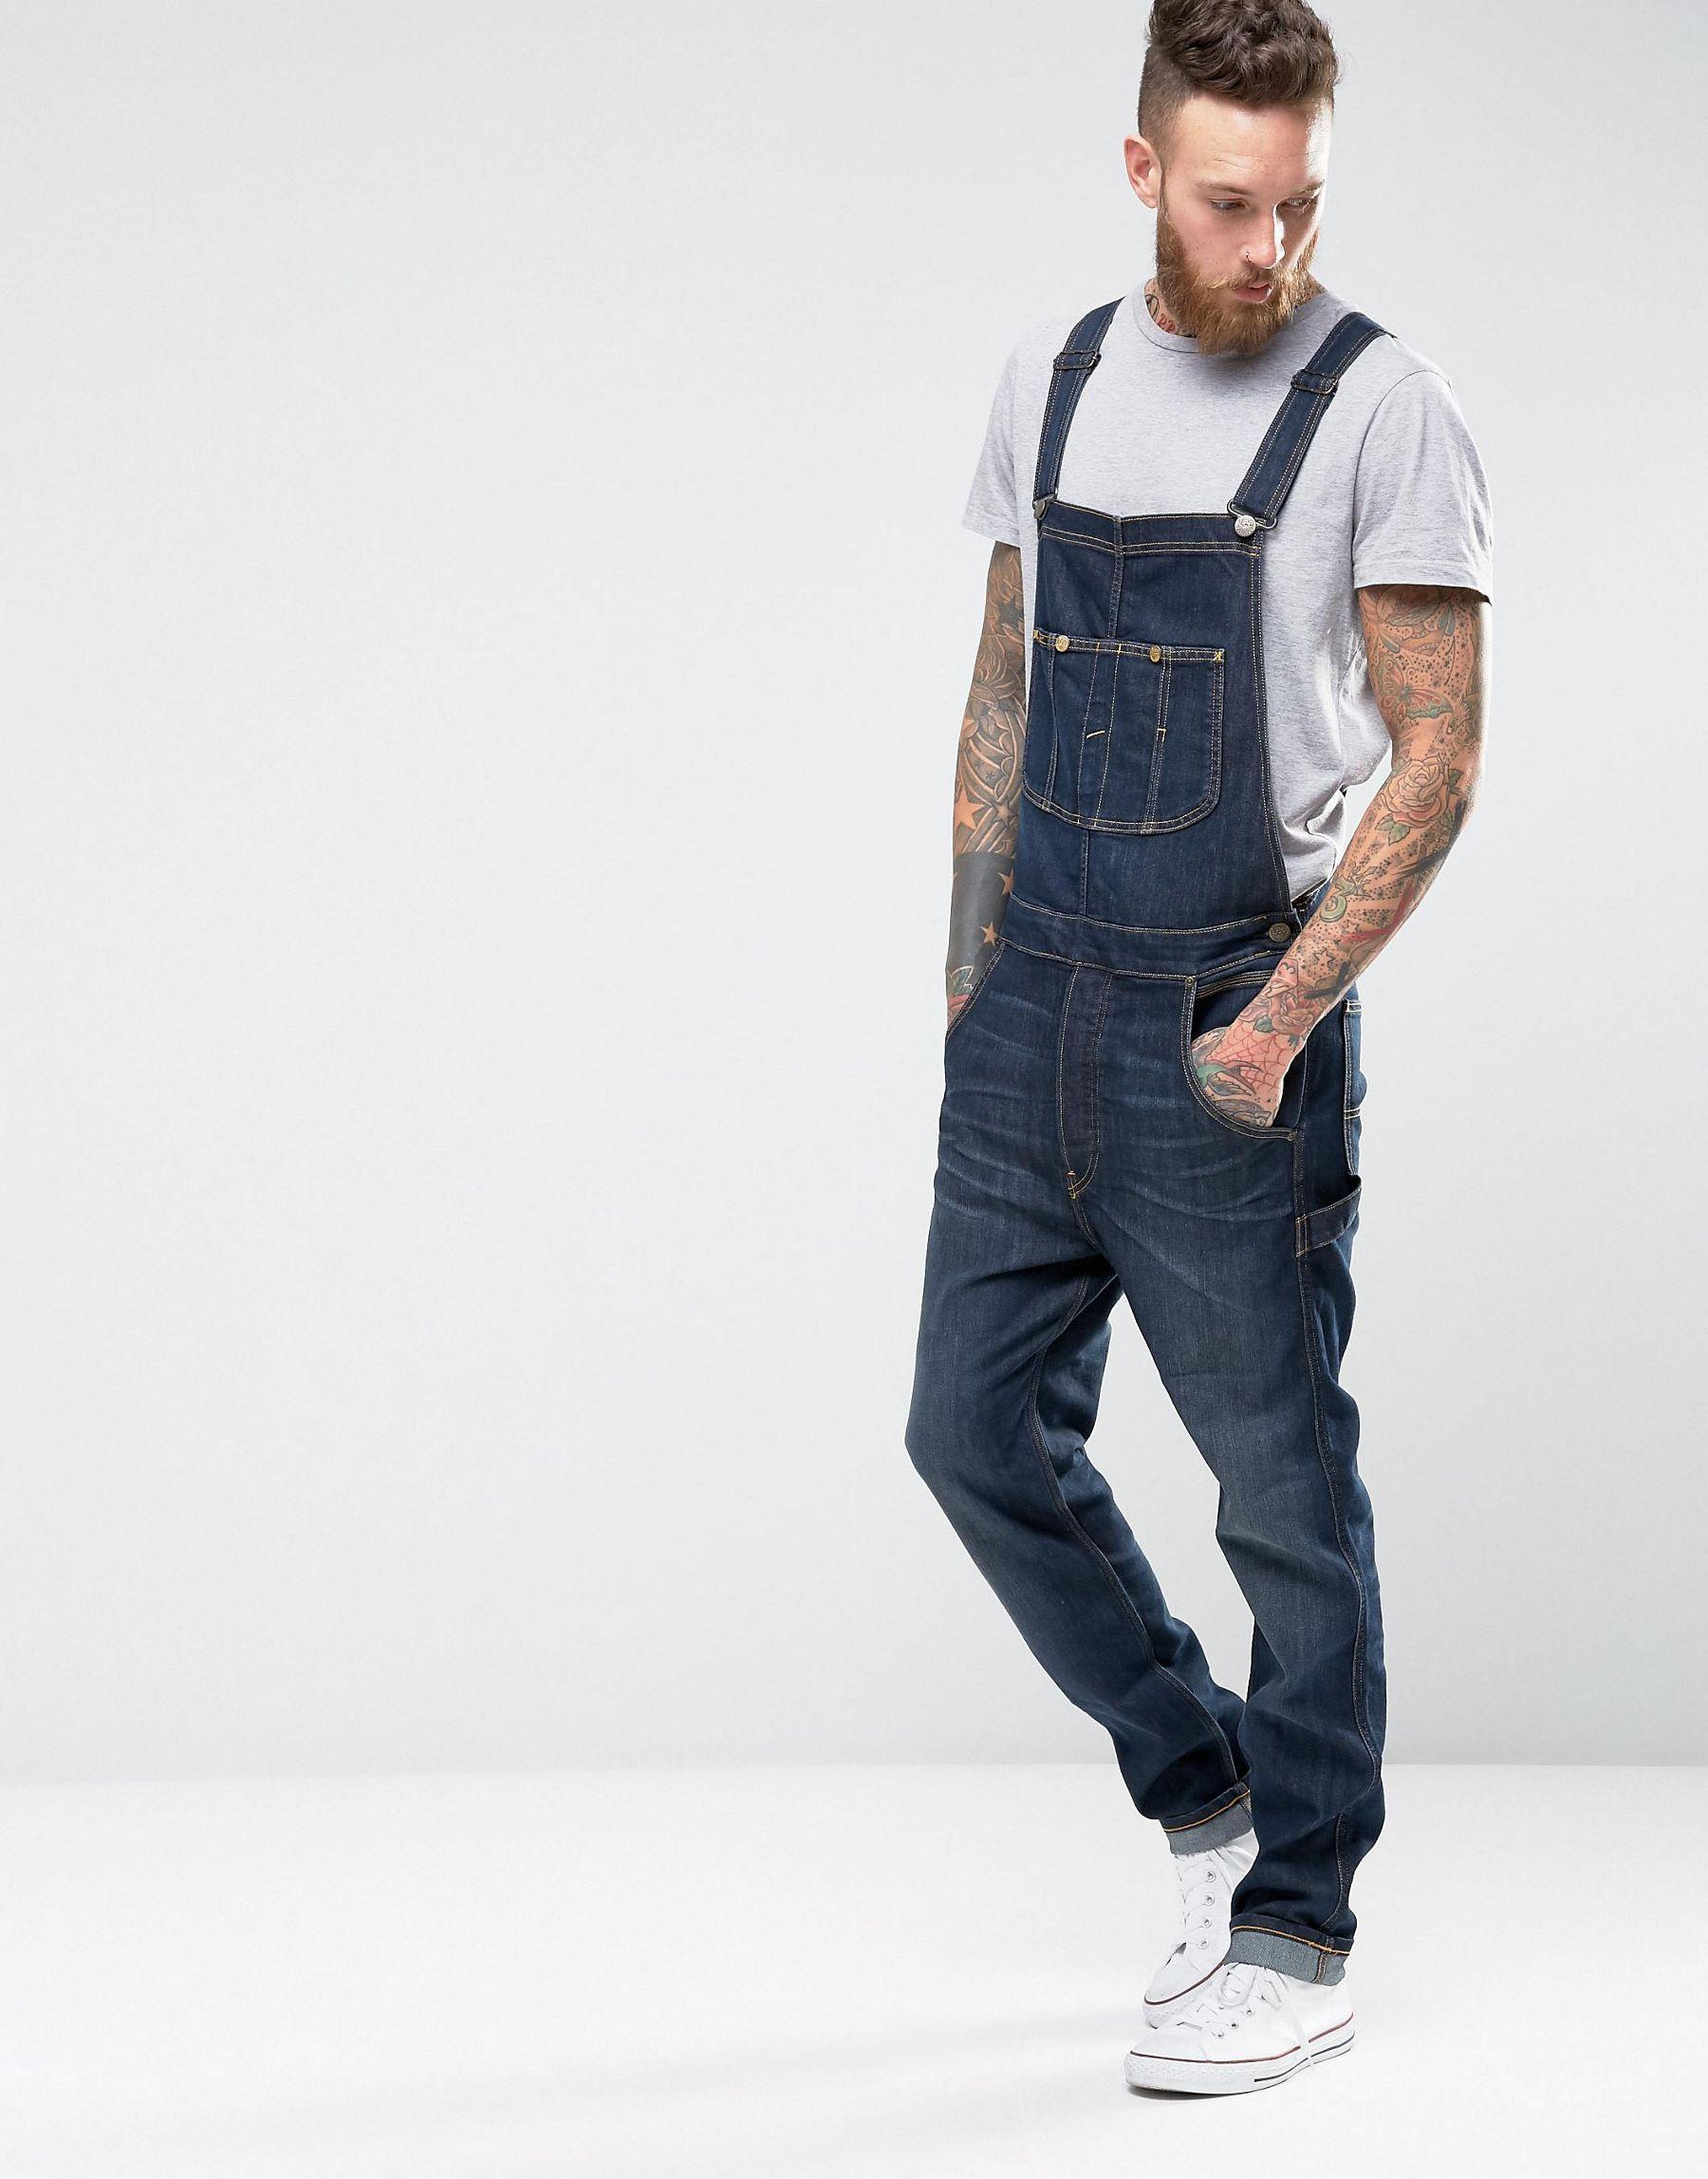 Lee Jeans Cotton Bib Dungarees Tapered Fast Blue for Men - Lyst